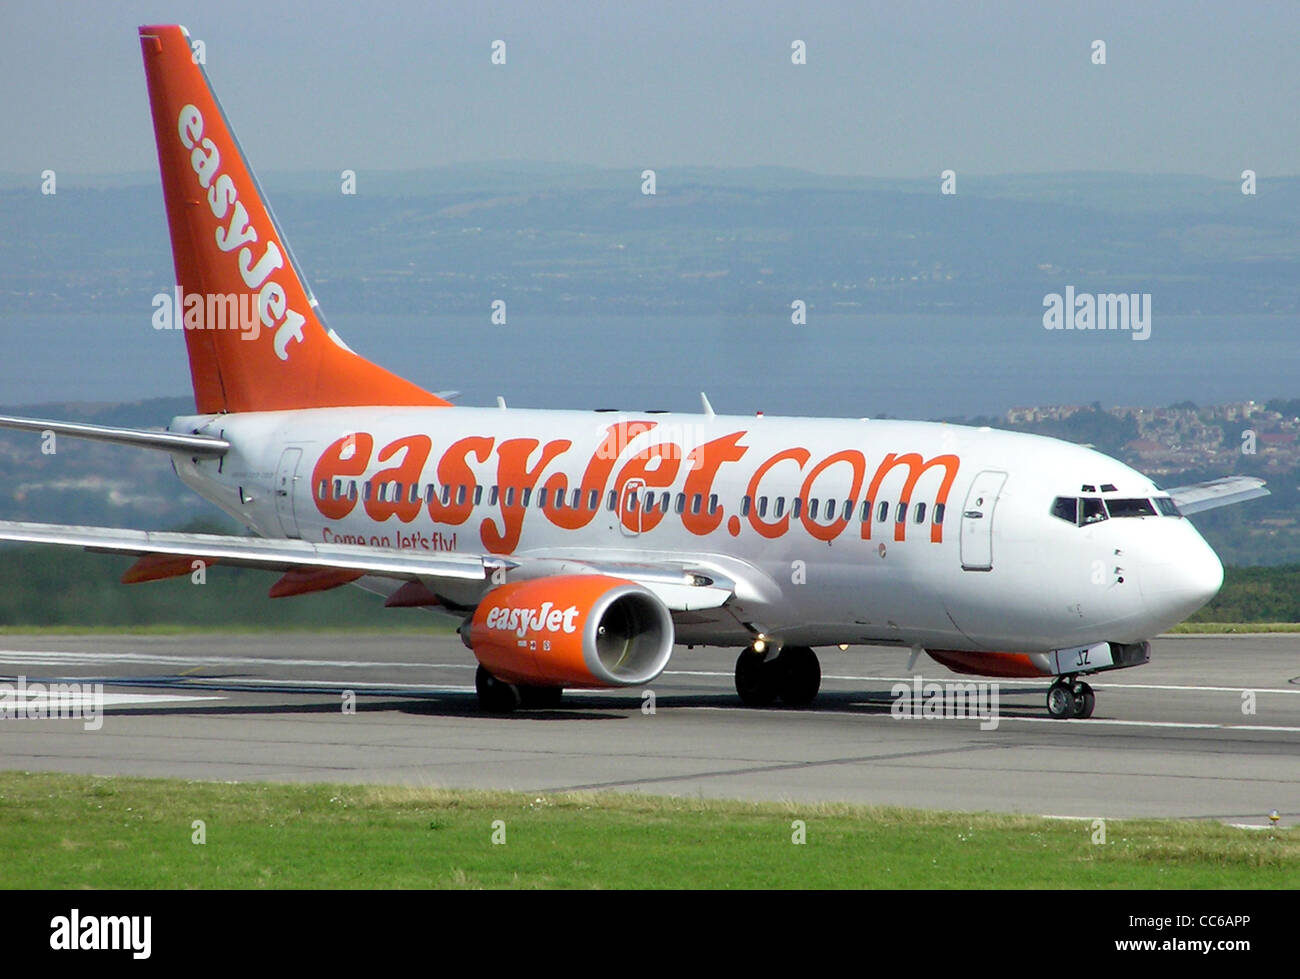 Boeing 737-700 of UK low cost carrier easyJet waiting for take off at Bristol International Airport, England. Stock Photo